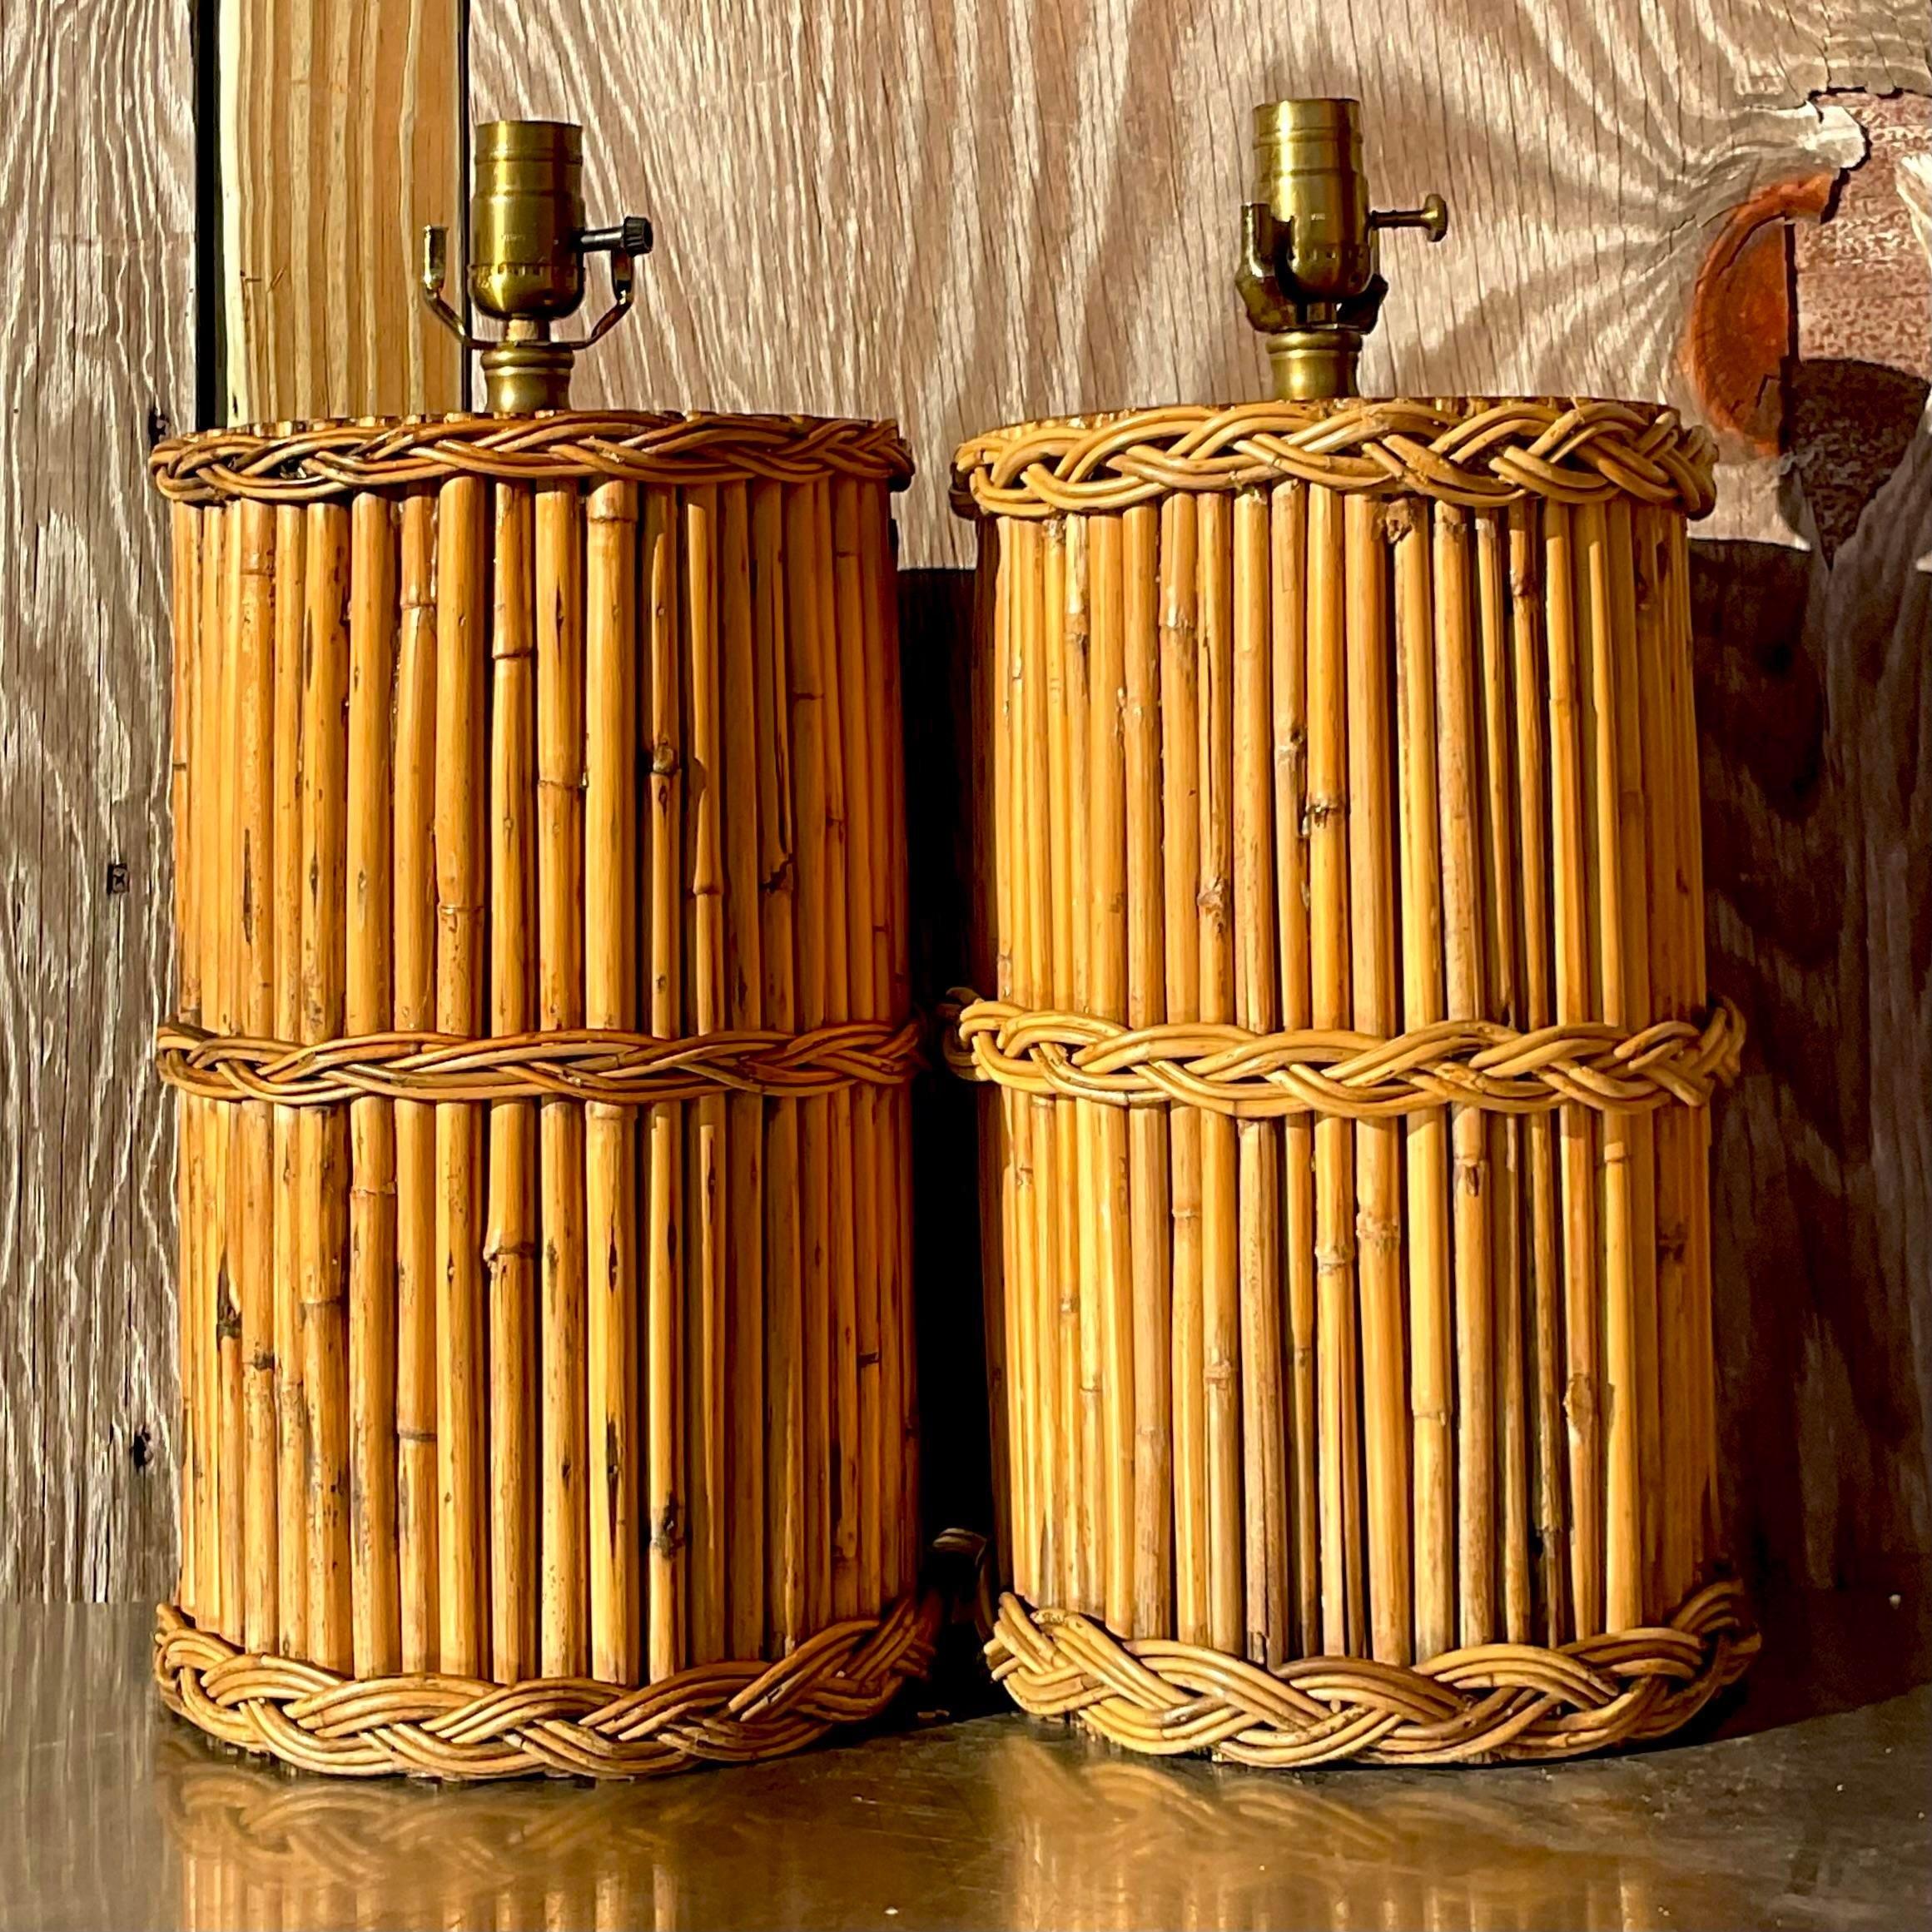 20th Century Vintage Coastal Braided Rattan Table Lamps - a Pair For Sale